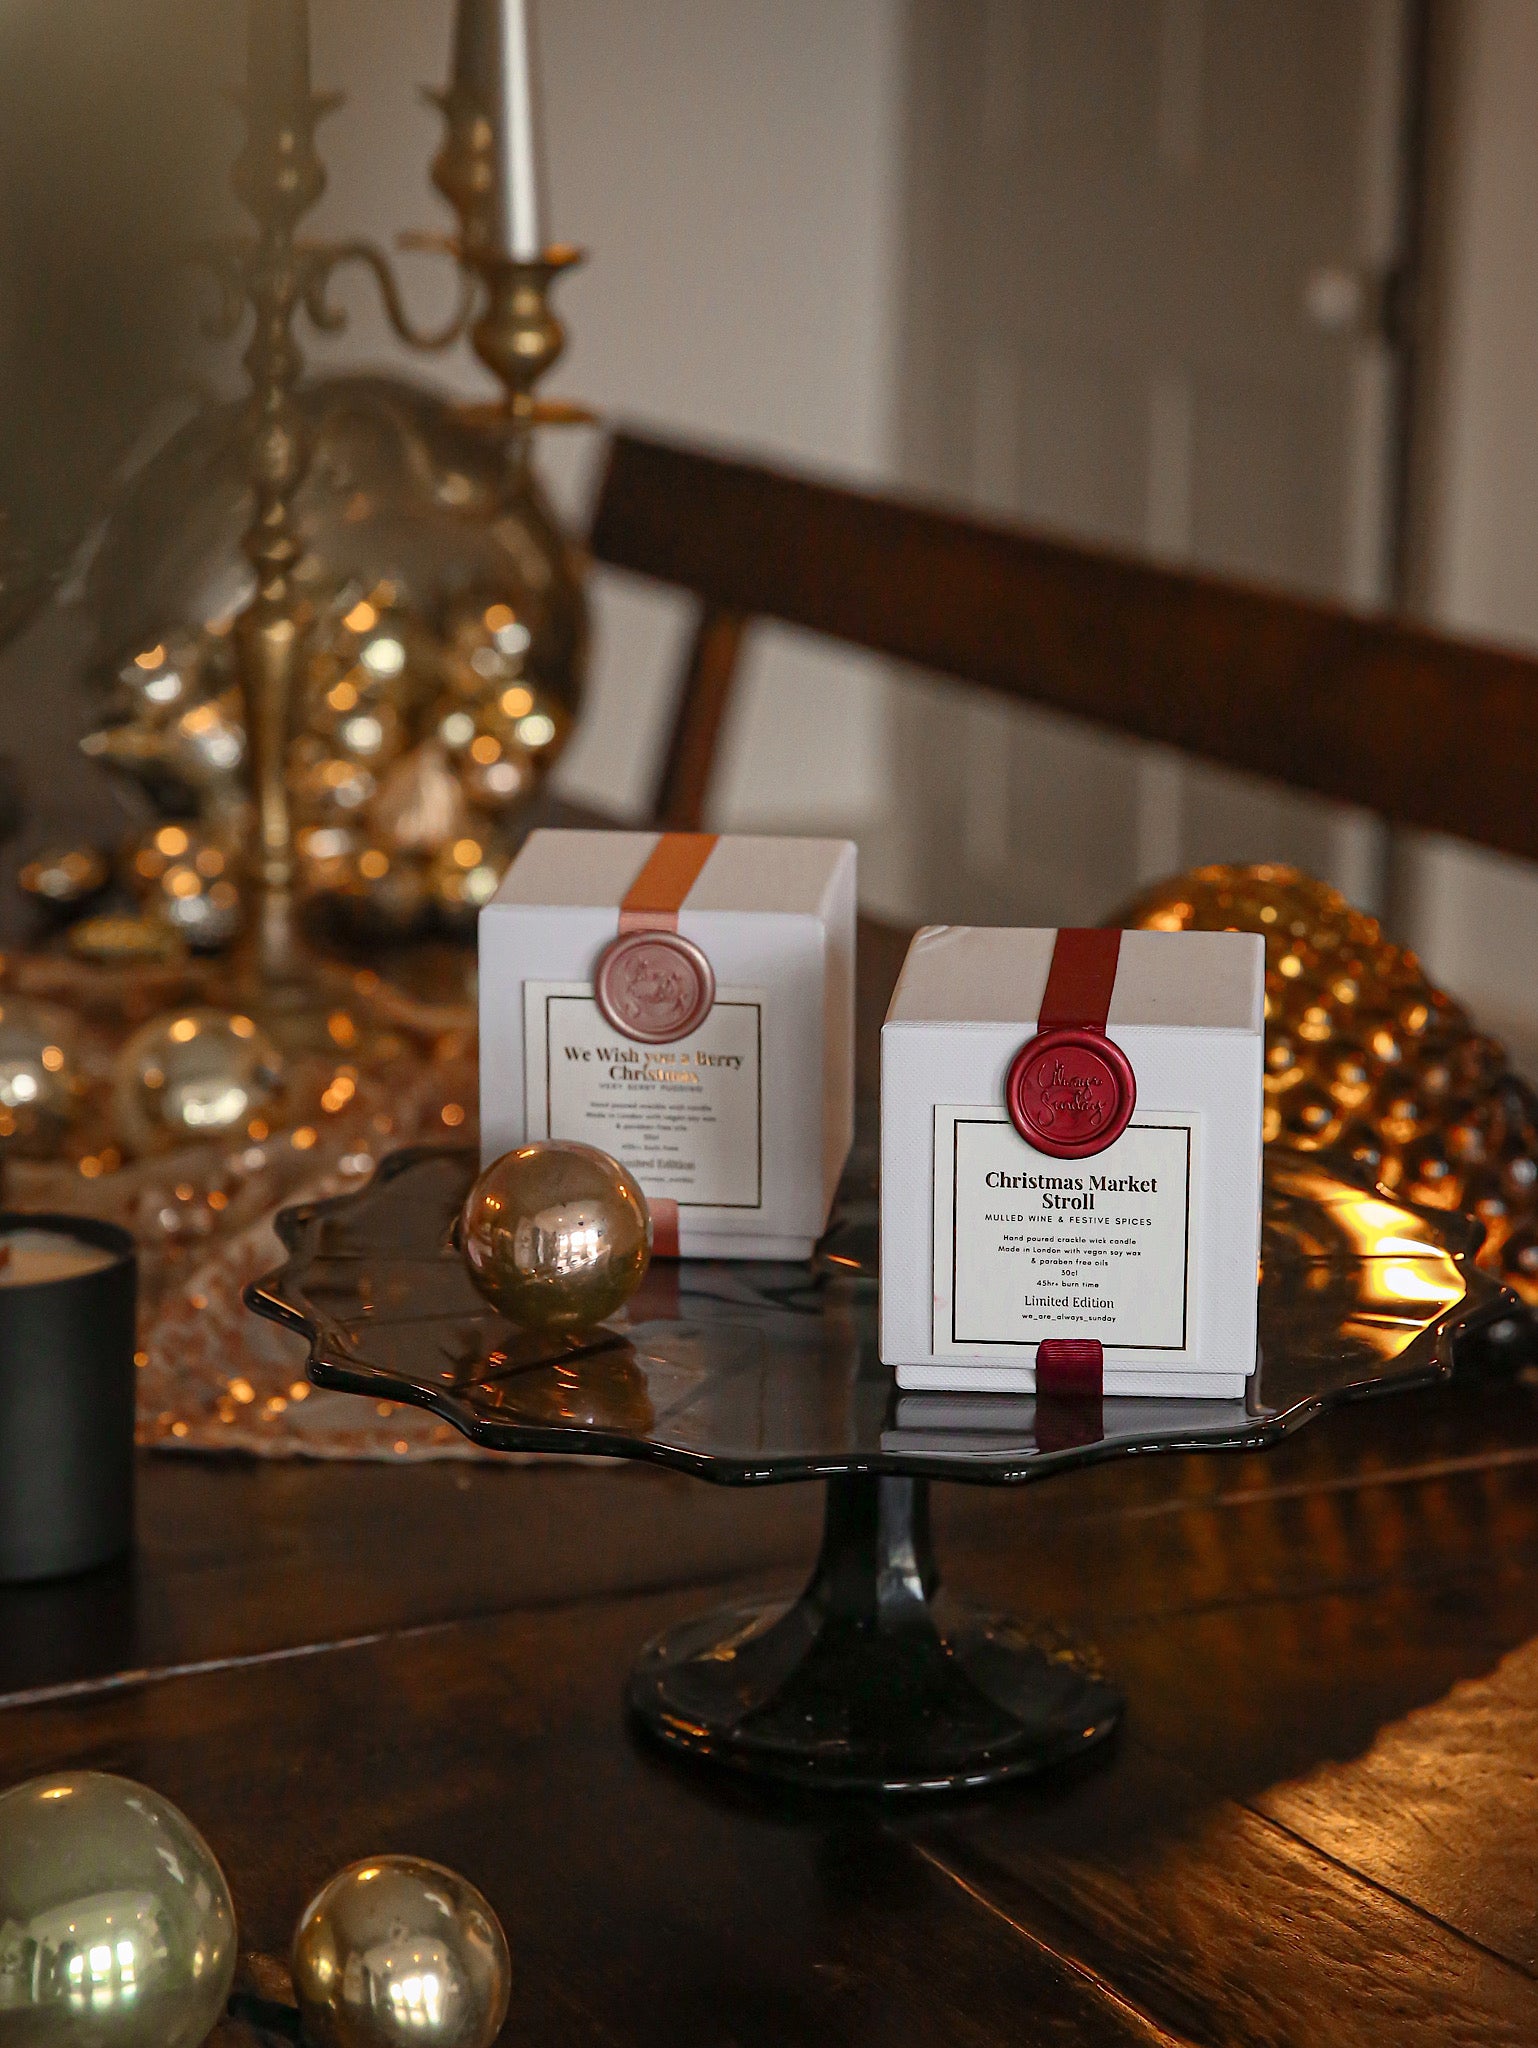 We Wish You a Berry Christmas Limited Edition Candle by Always Sunday